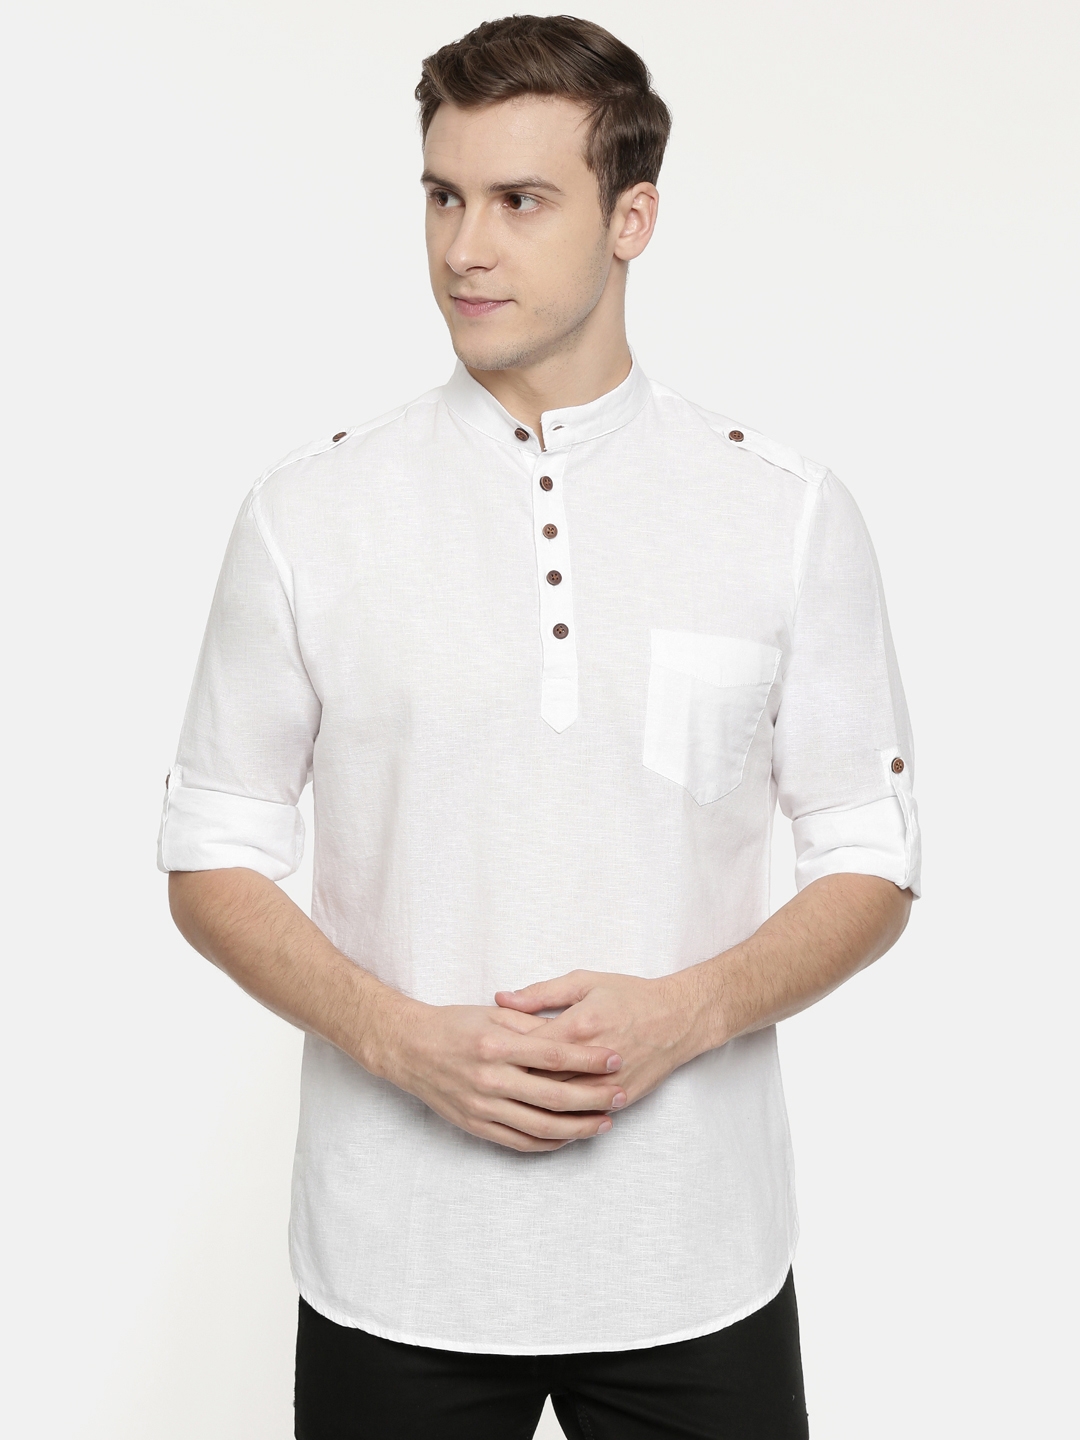 ROLLER FASHIONS | Roller Fashions Men's Cotton Solid Straight White Color Short Kurta